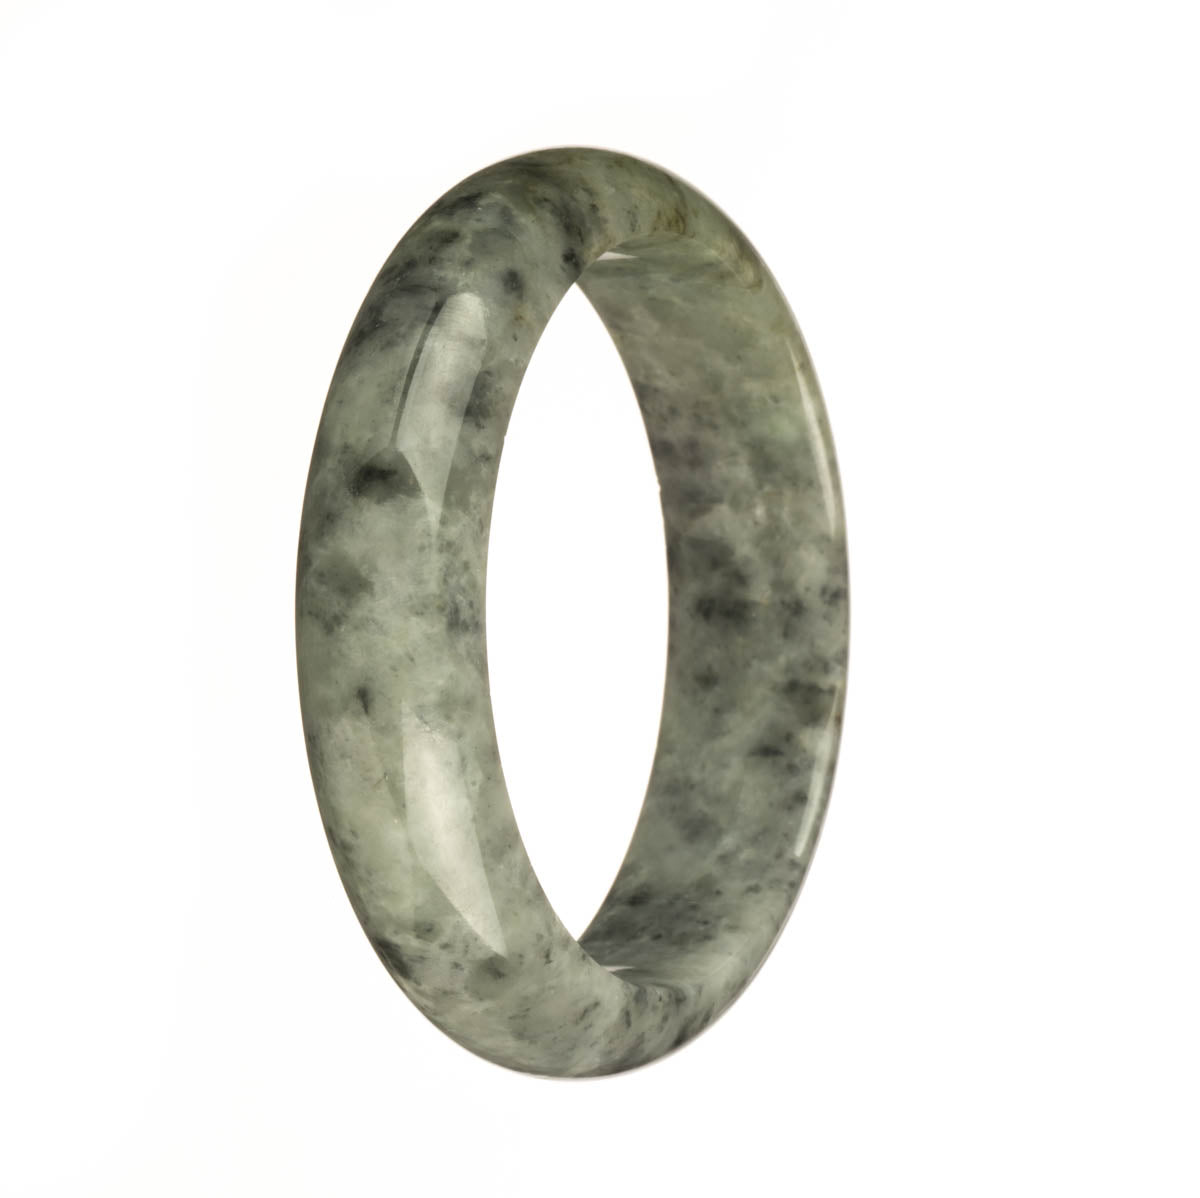 A half-moon shaped, Grade A grey pattern Burmese jade bangle, certified and of high quality, from MAYS.